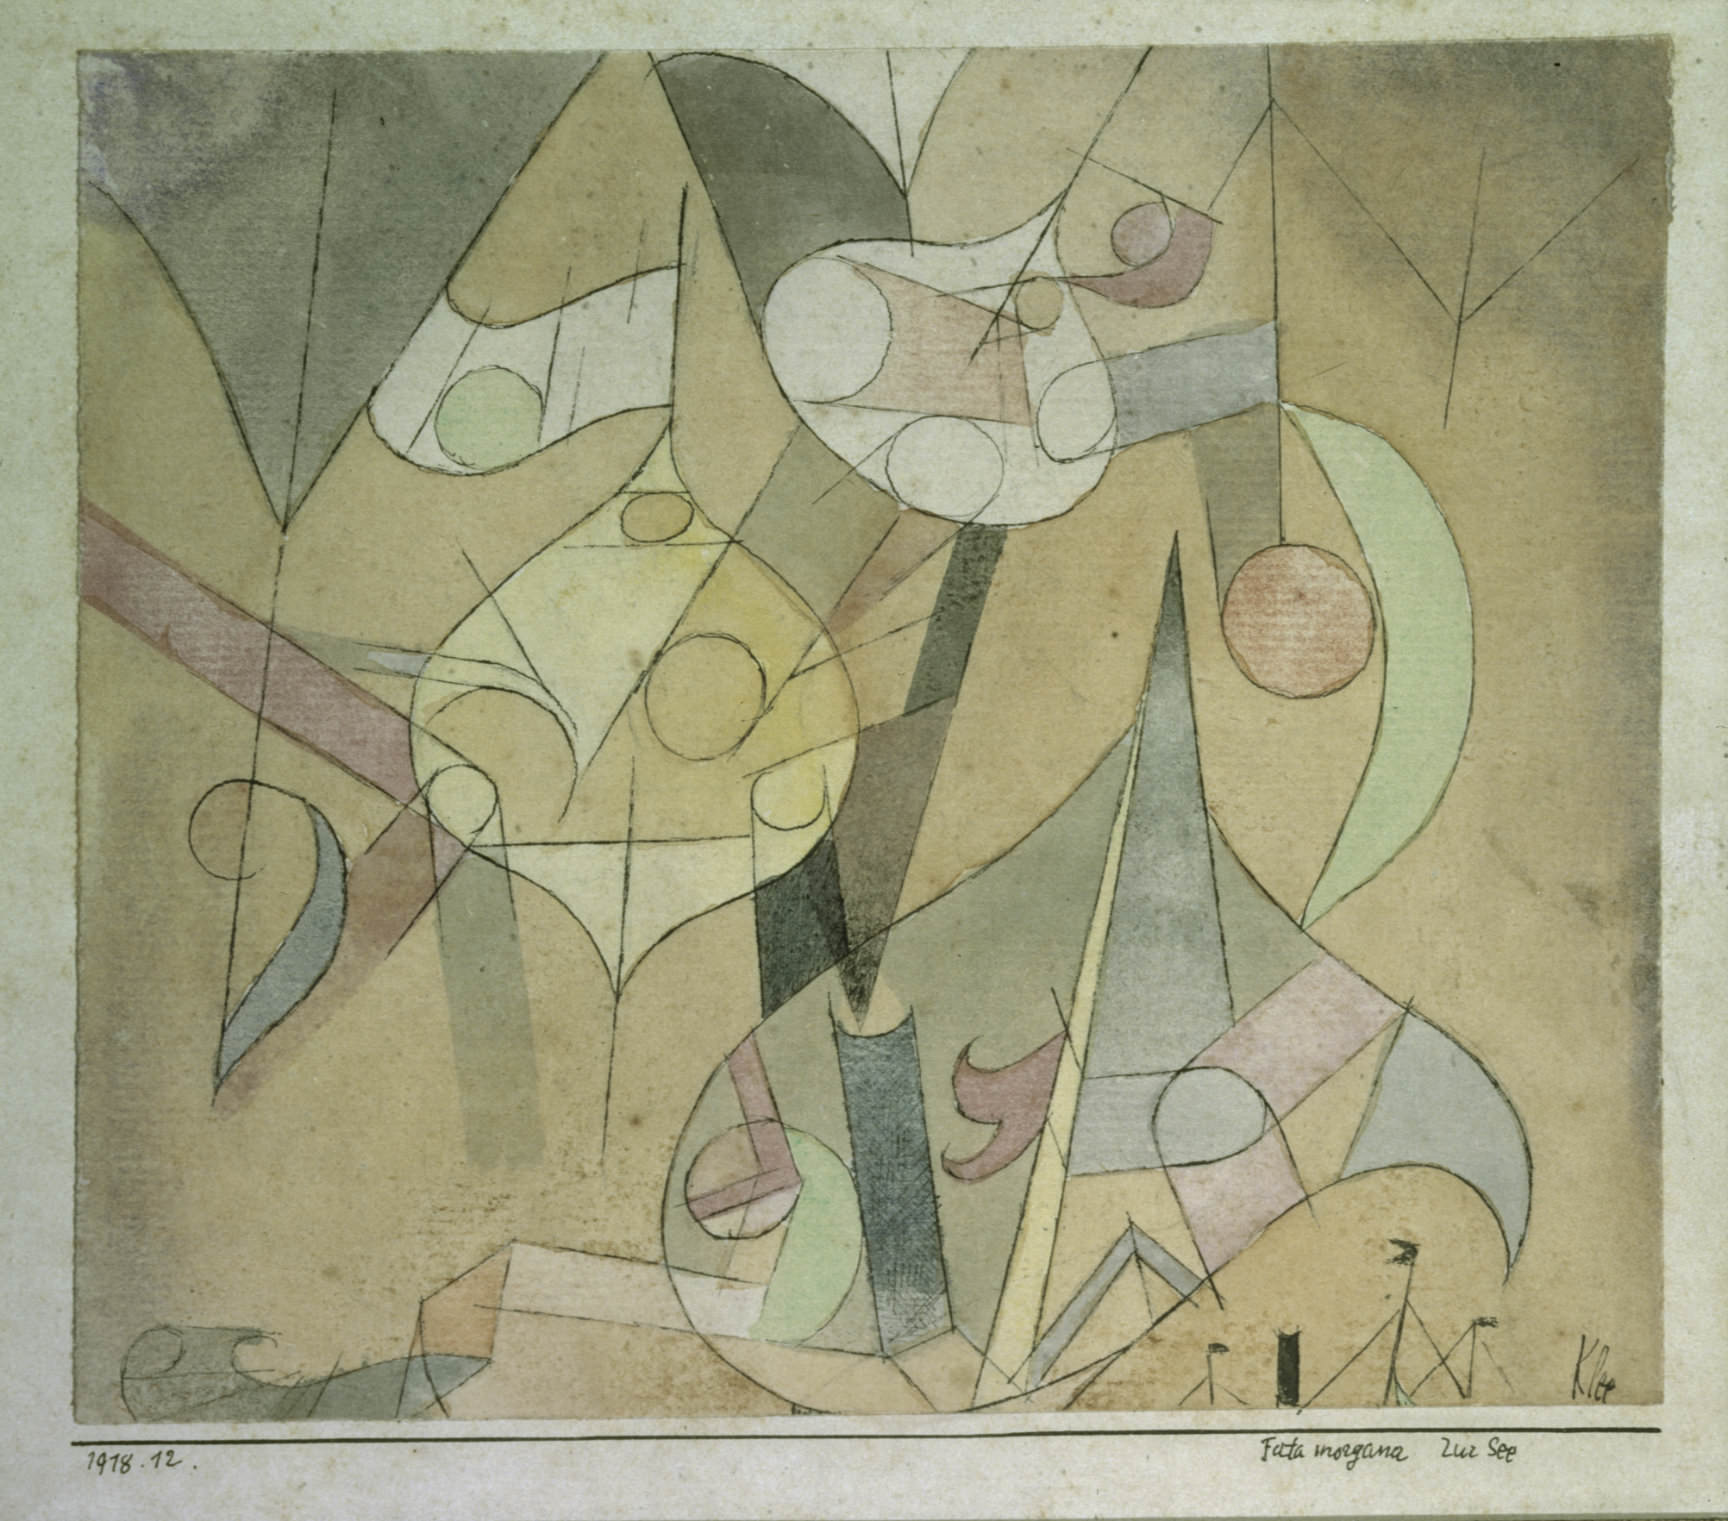  fig. 4  Paul Klee,  Fata morgana zur See  [Fata Morgana at Sea], 1918, 12, watercolour and pen on paper on cardboard, 12,7 x 14,9 cm , San Francisco Museum of Modern Art, Extended loan and promised gift of the Carl Djerassi Art Trust I, © San Franci